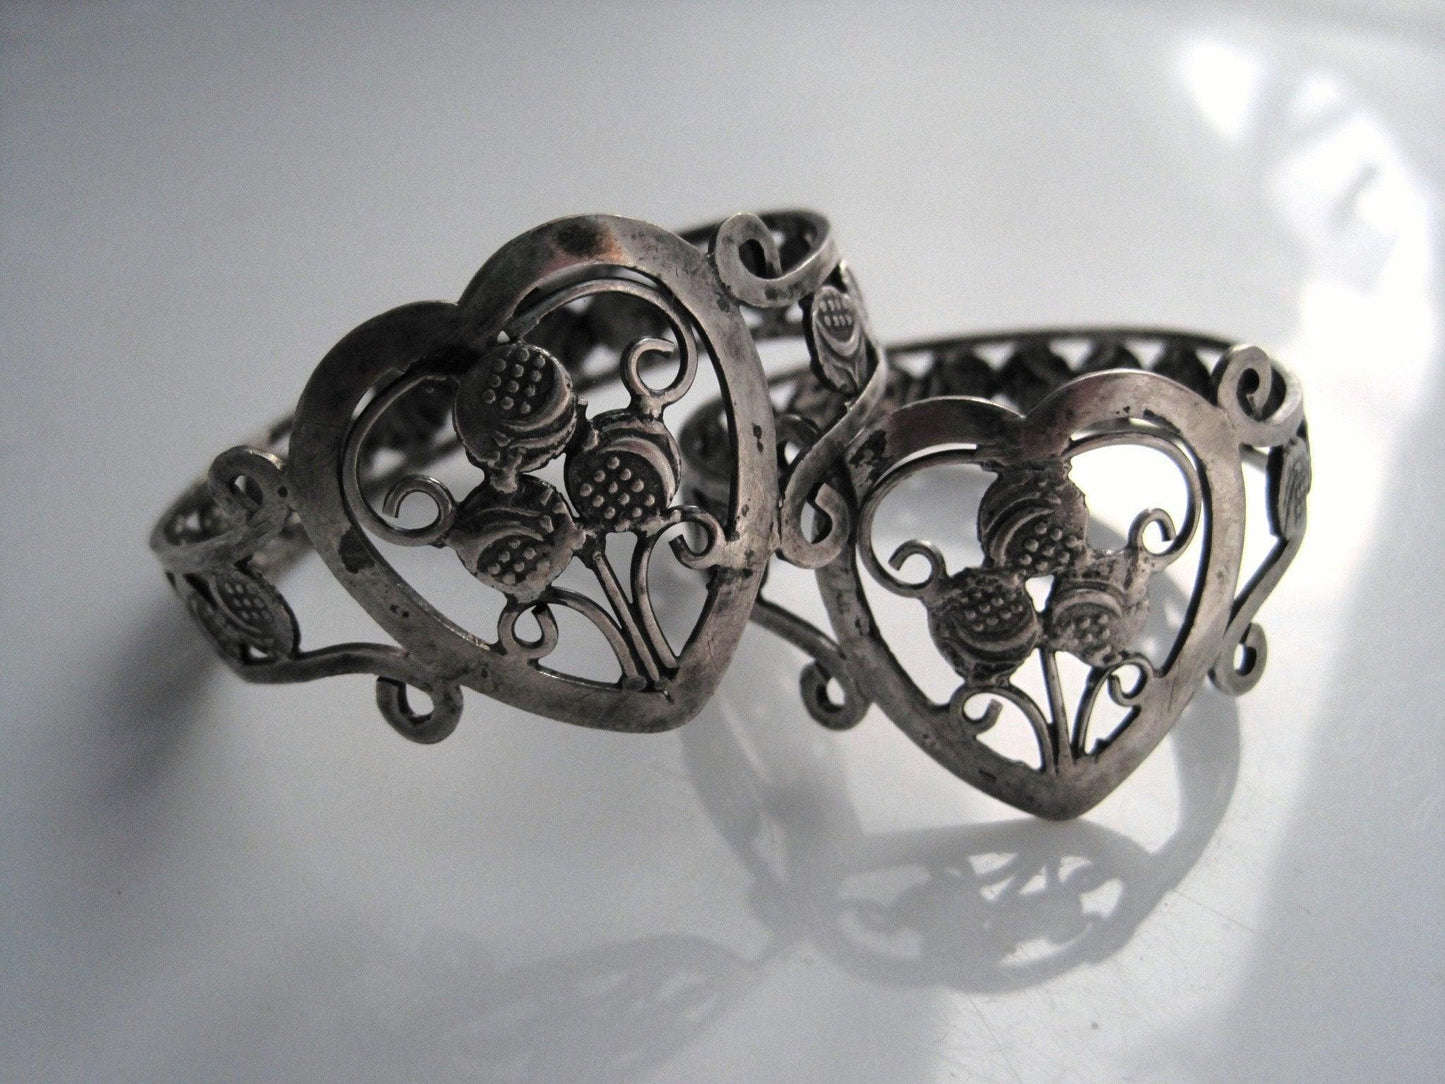 Pair of Silver Middle East Open Work Baby Bracelets or Napkin Rings - Anteeka